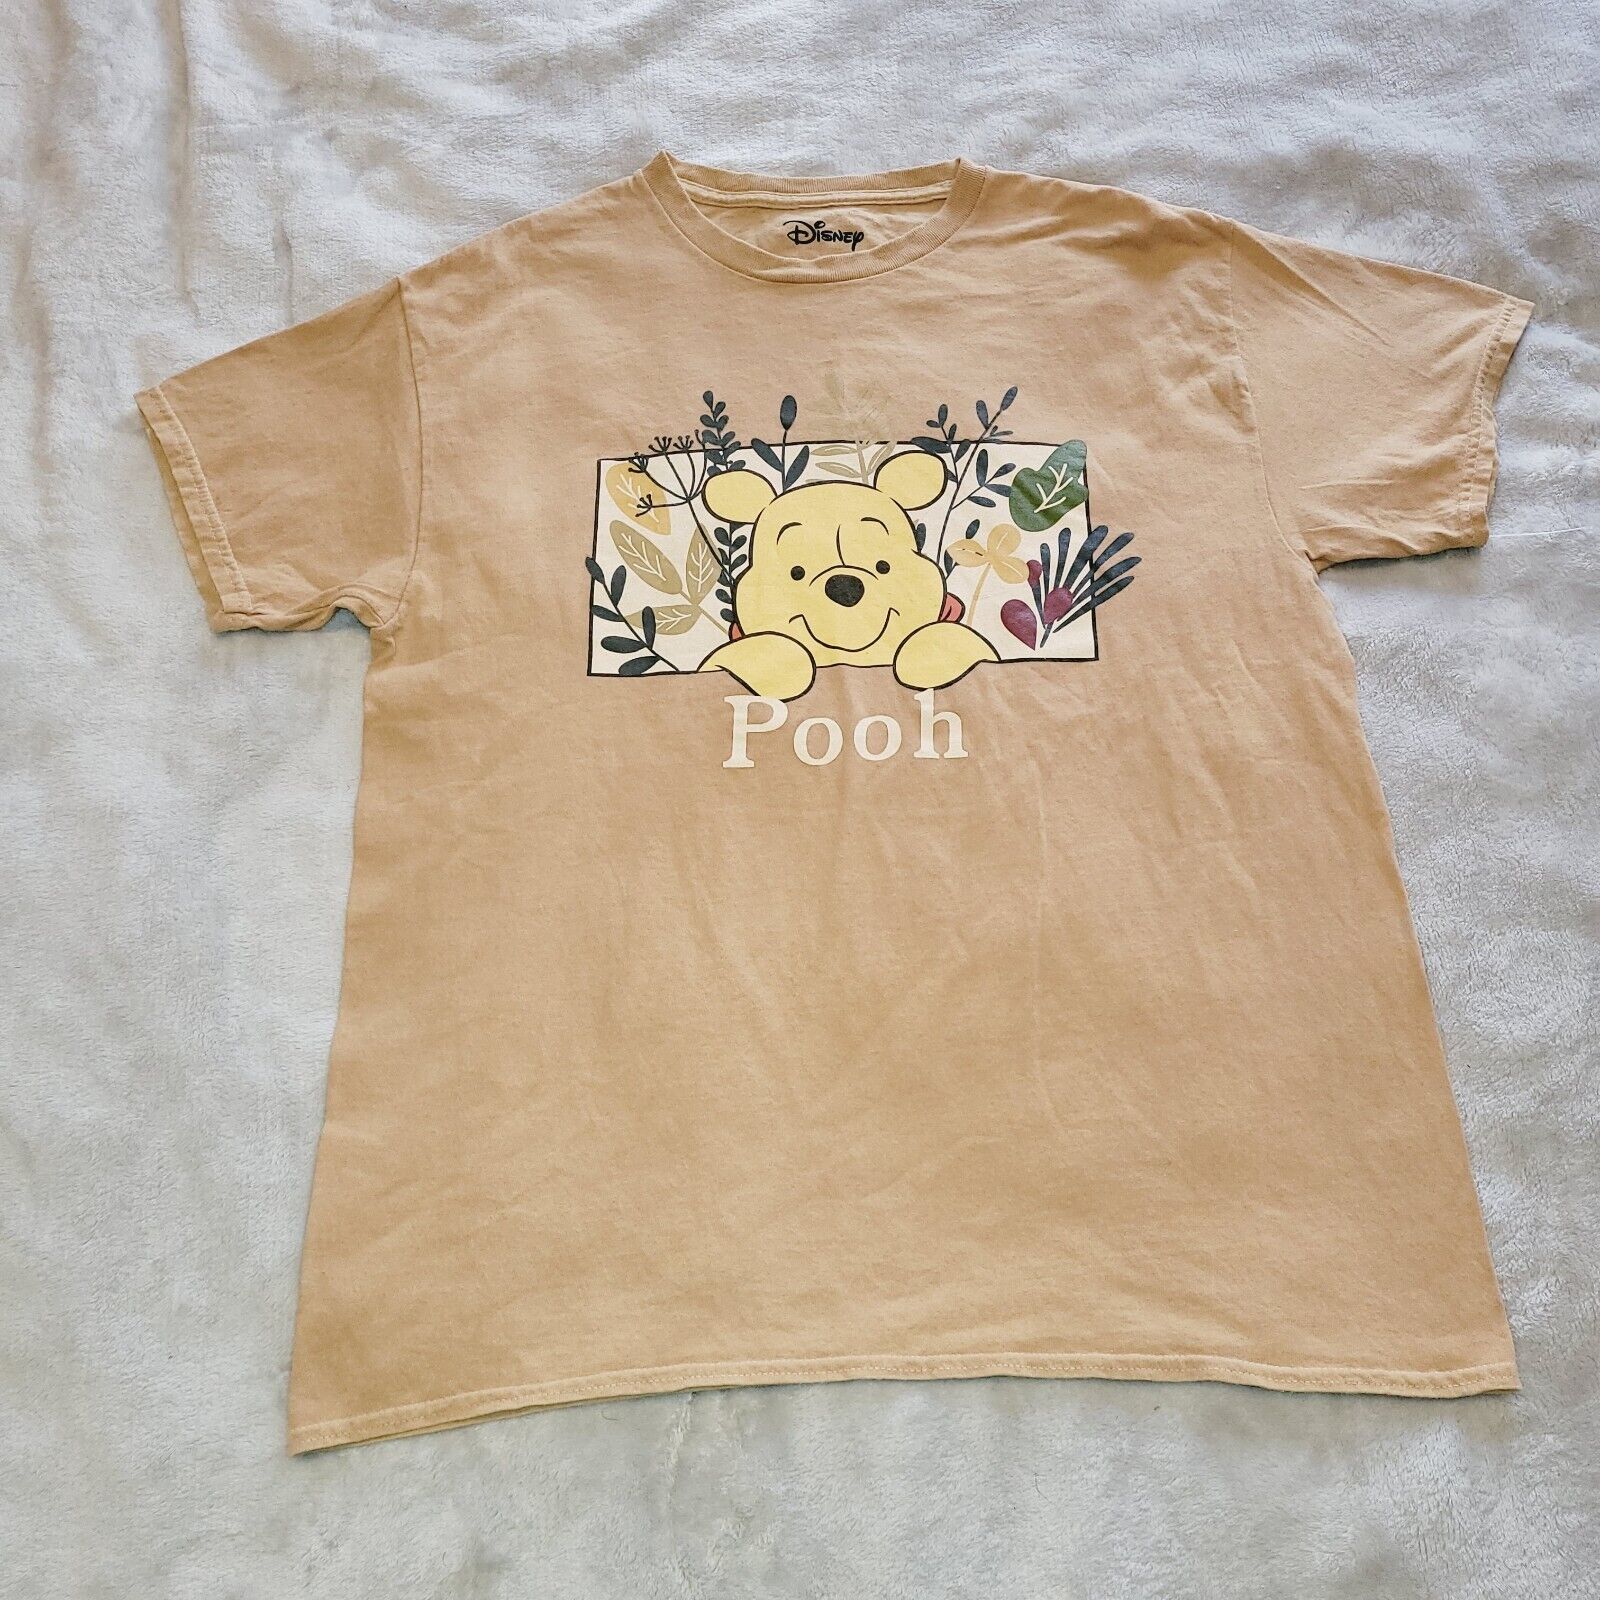 Disney Winnie The Pooh T-Shirt Adult Size Large Honey Gold New Without Tag